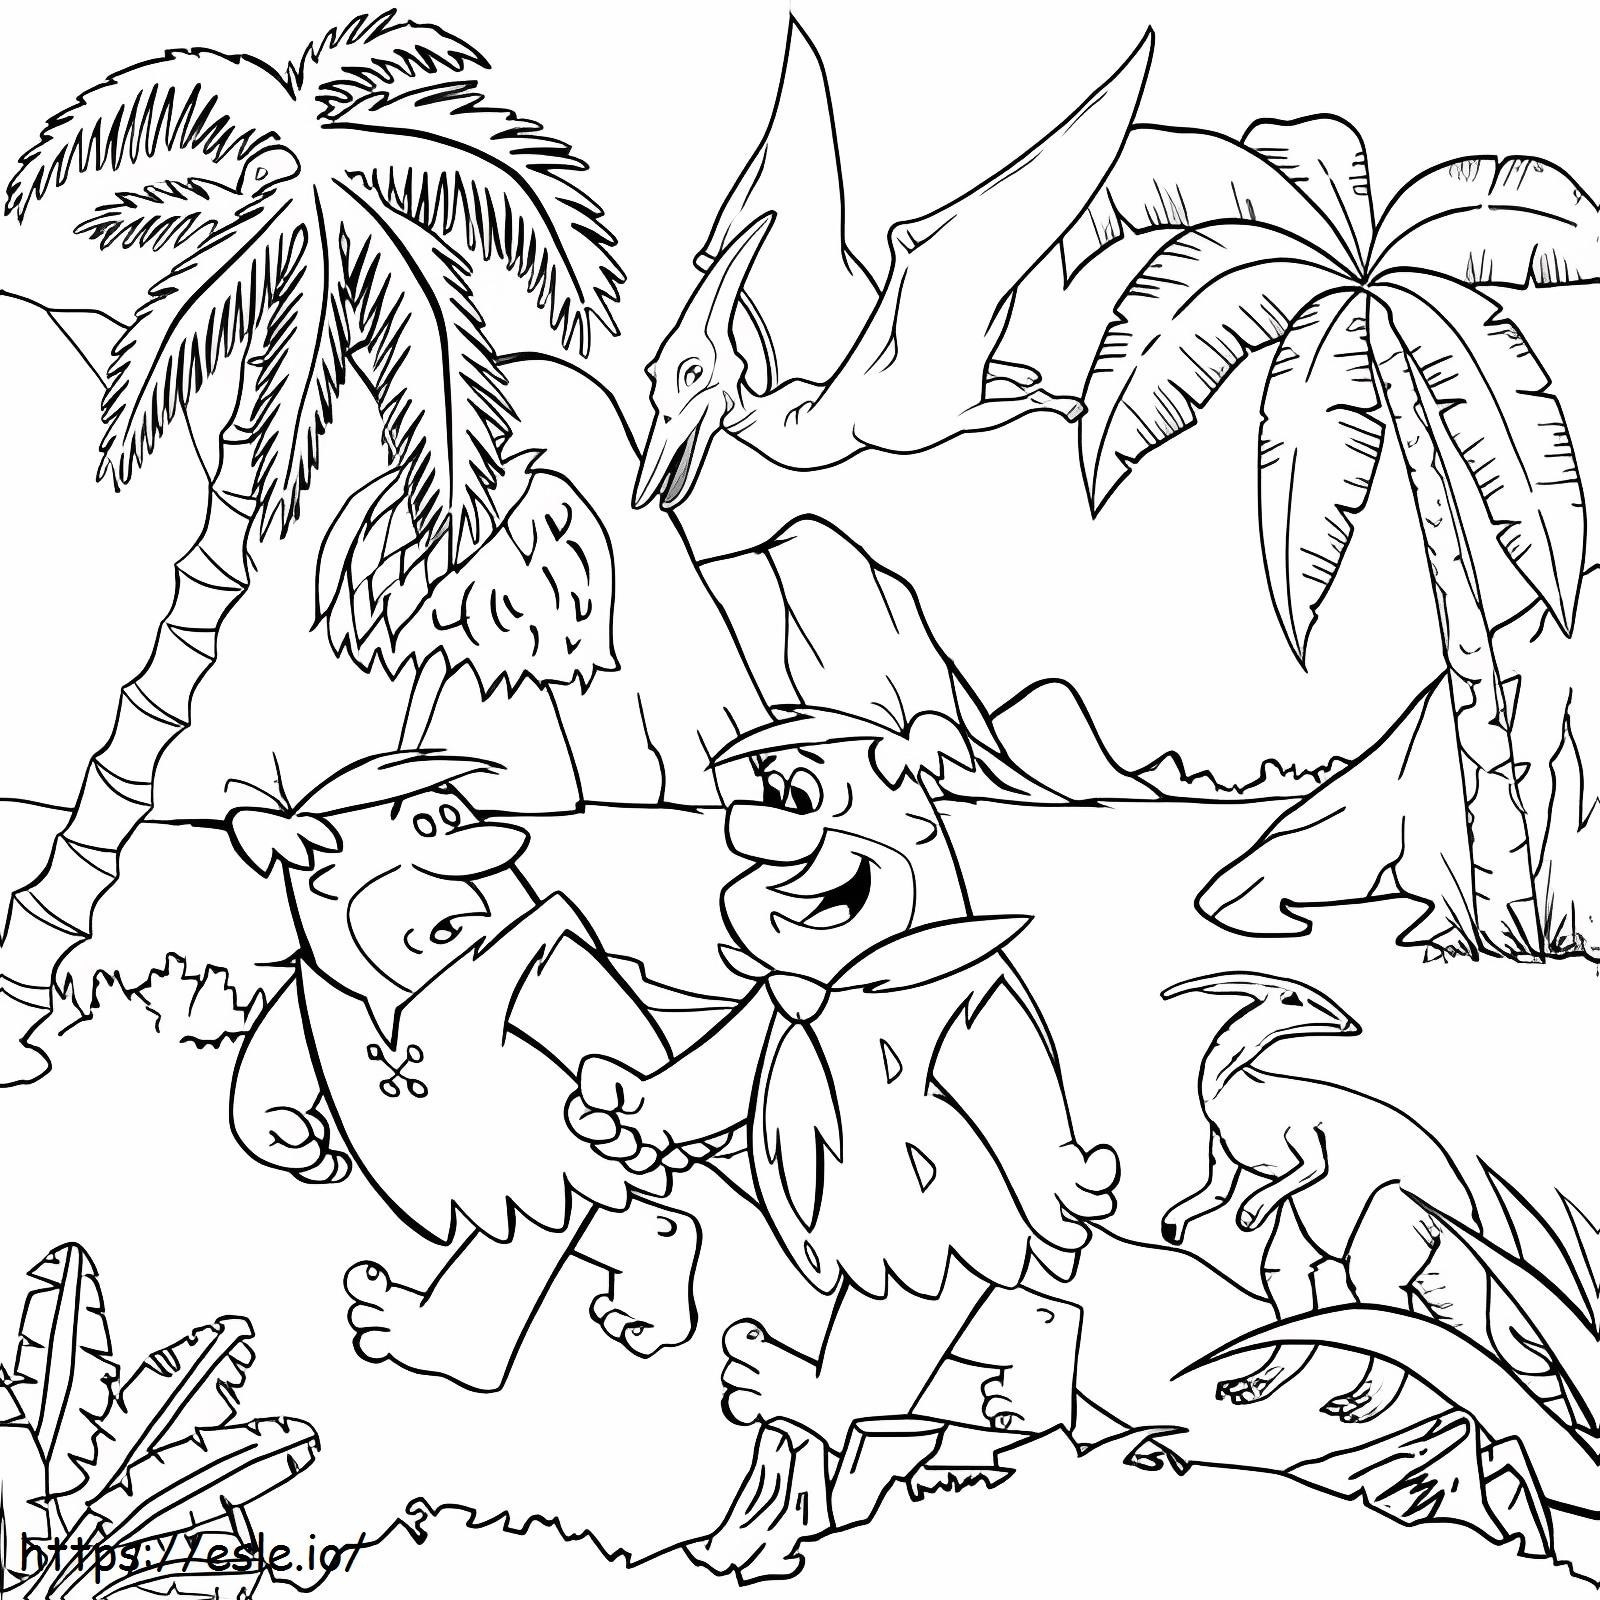 Two Stone Age Men In The Jungle coloring page